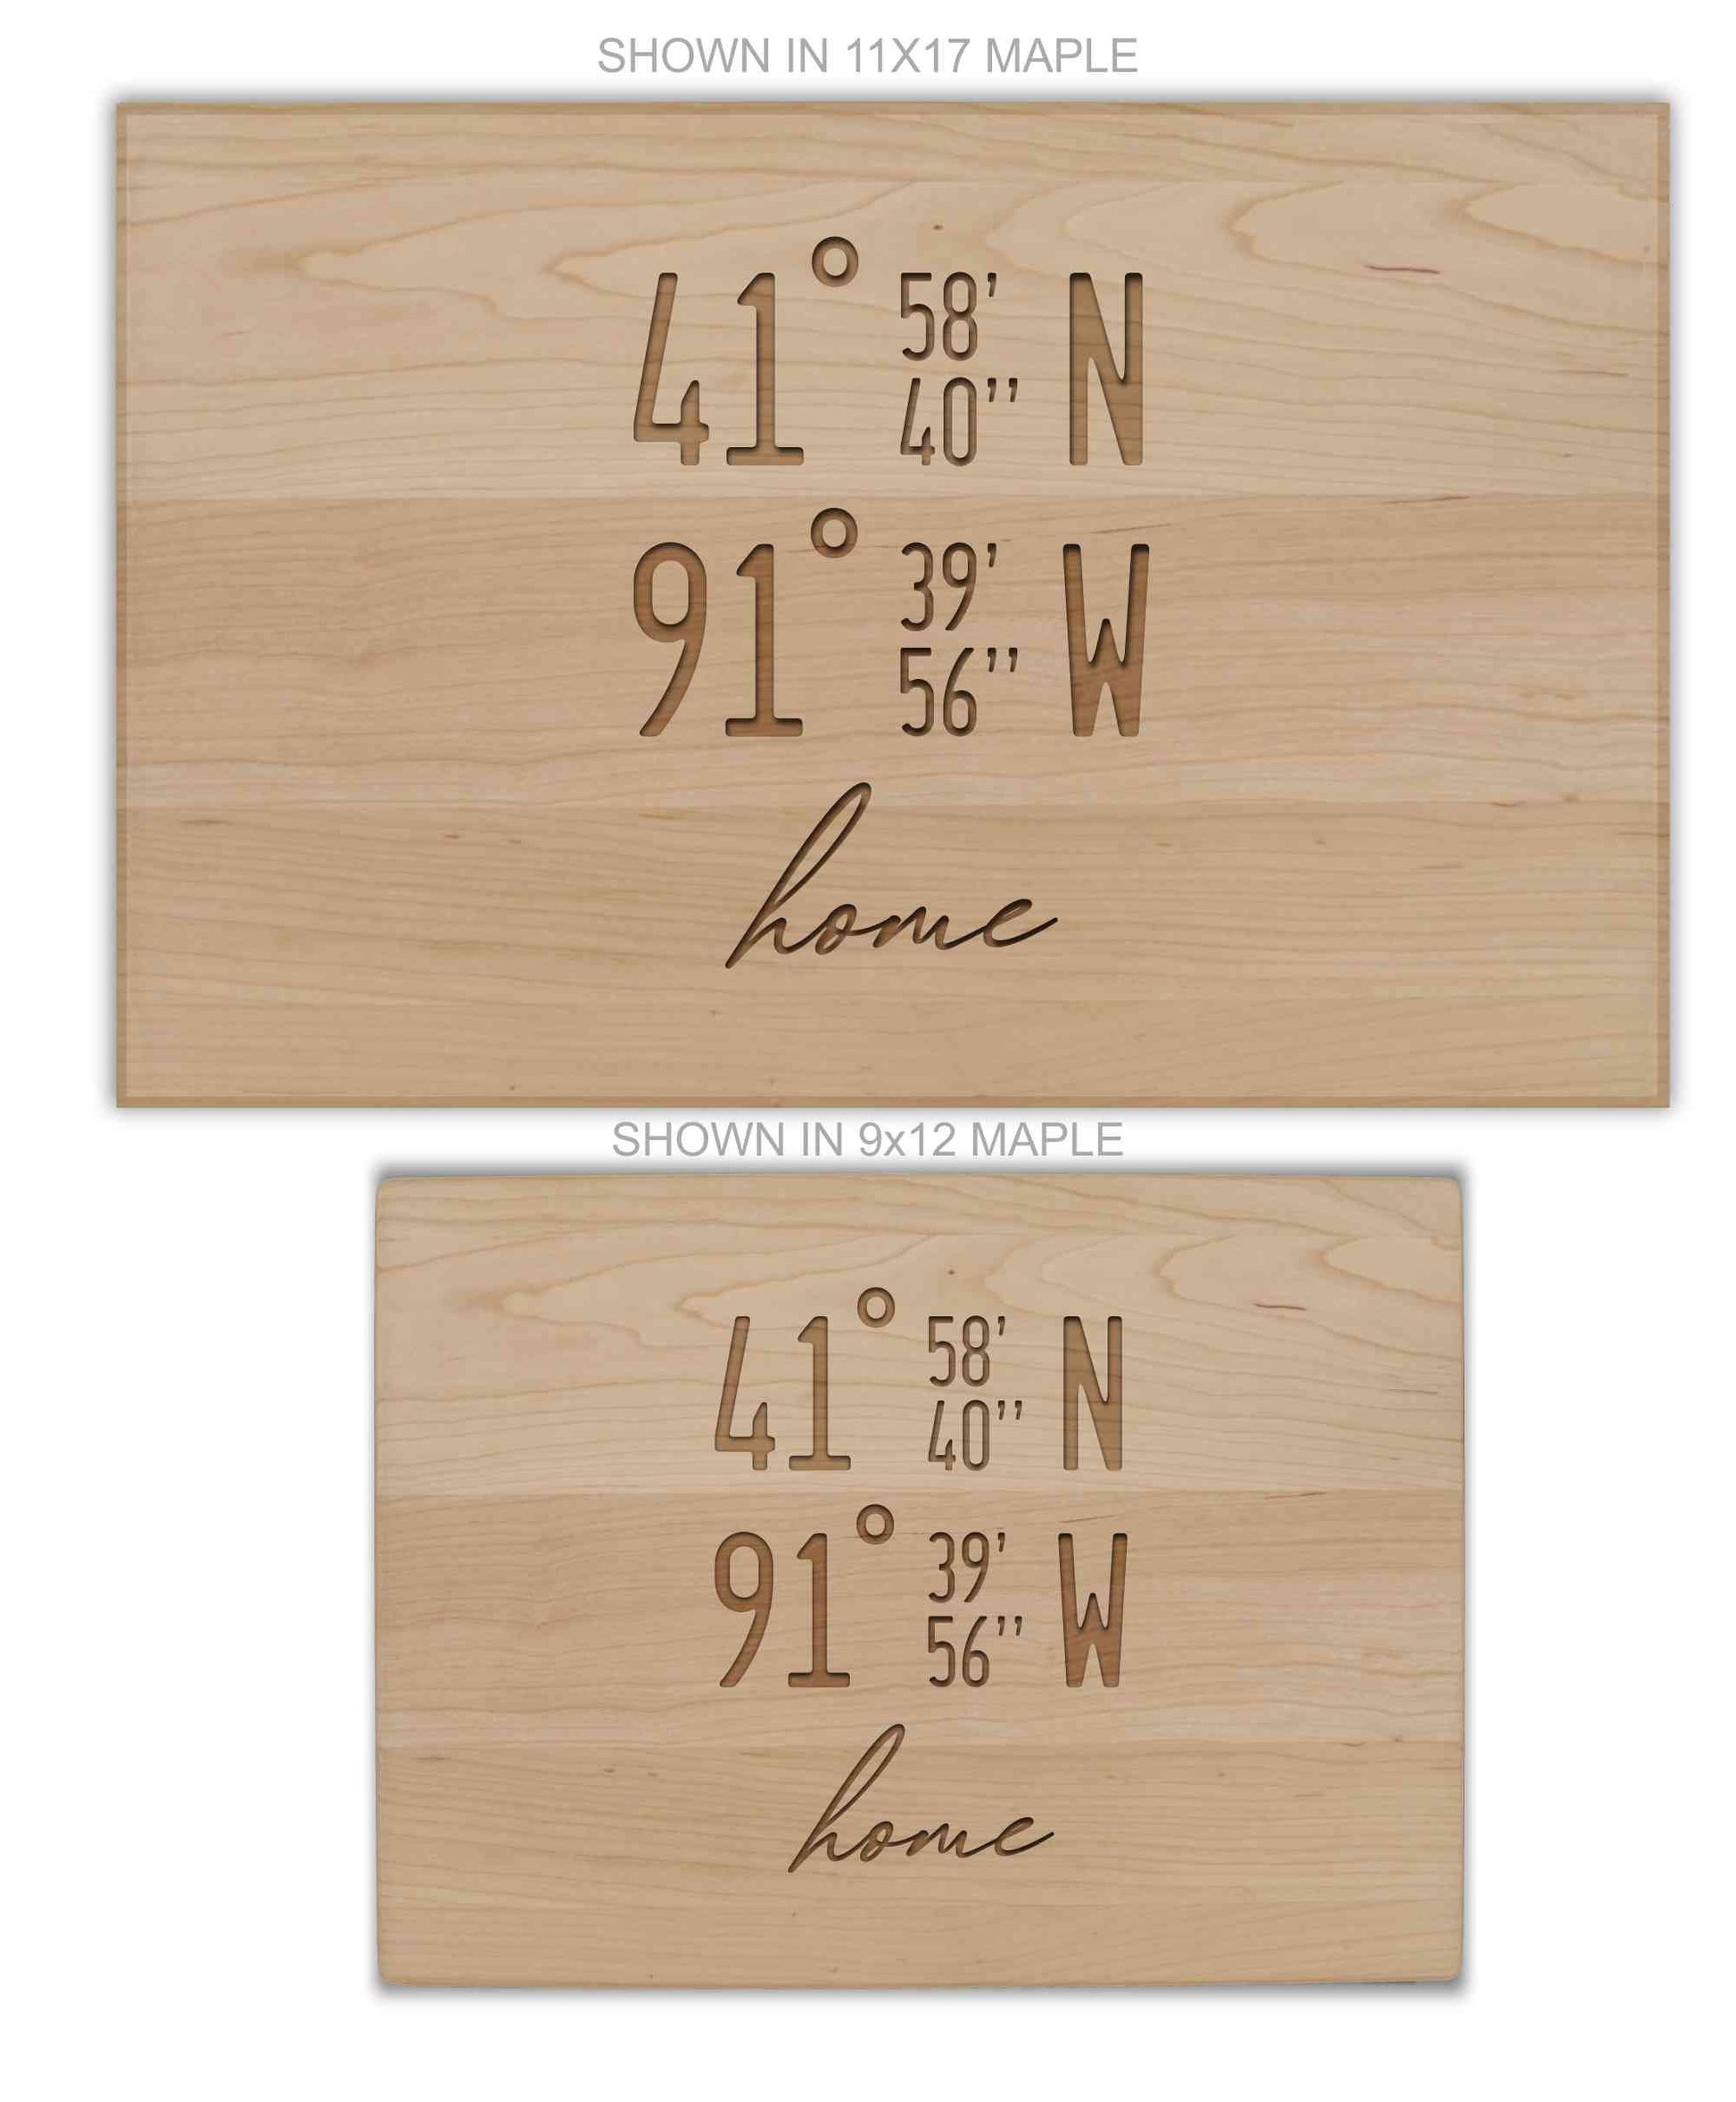 Personalized cutting board with GPS coordinates